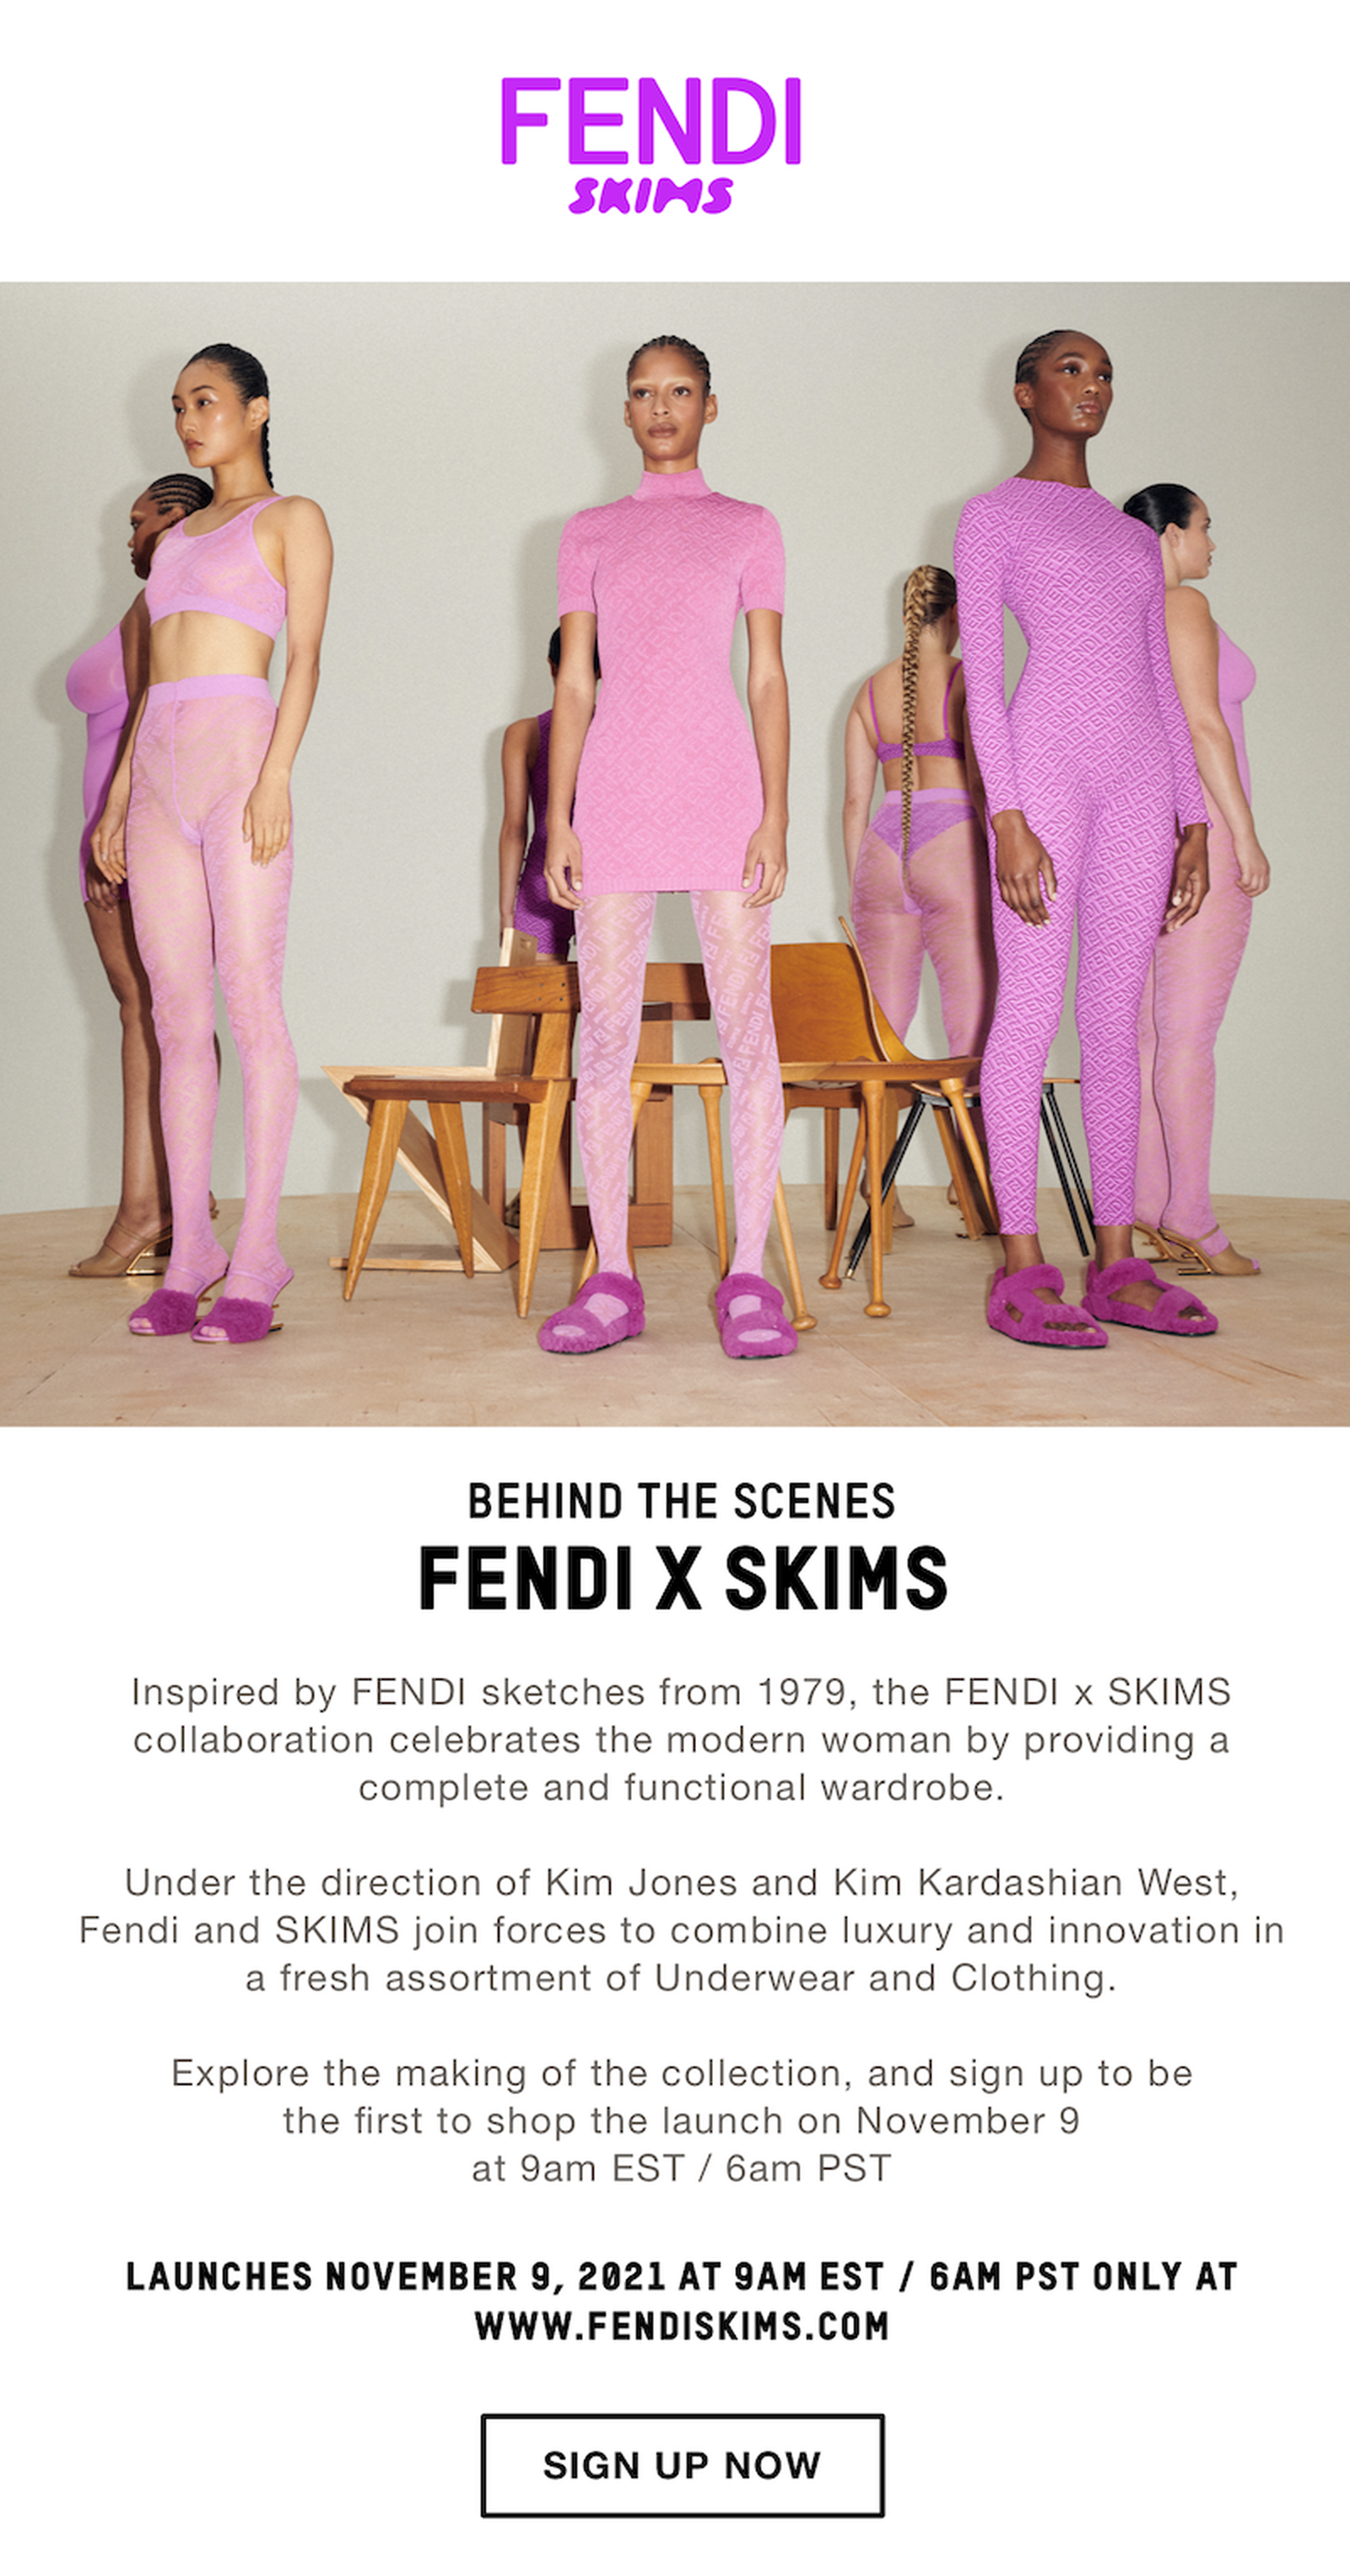 Kim Possible! Fendi and Skims are officially collaborating